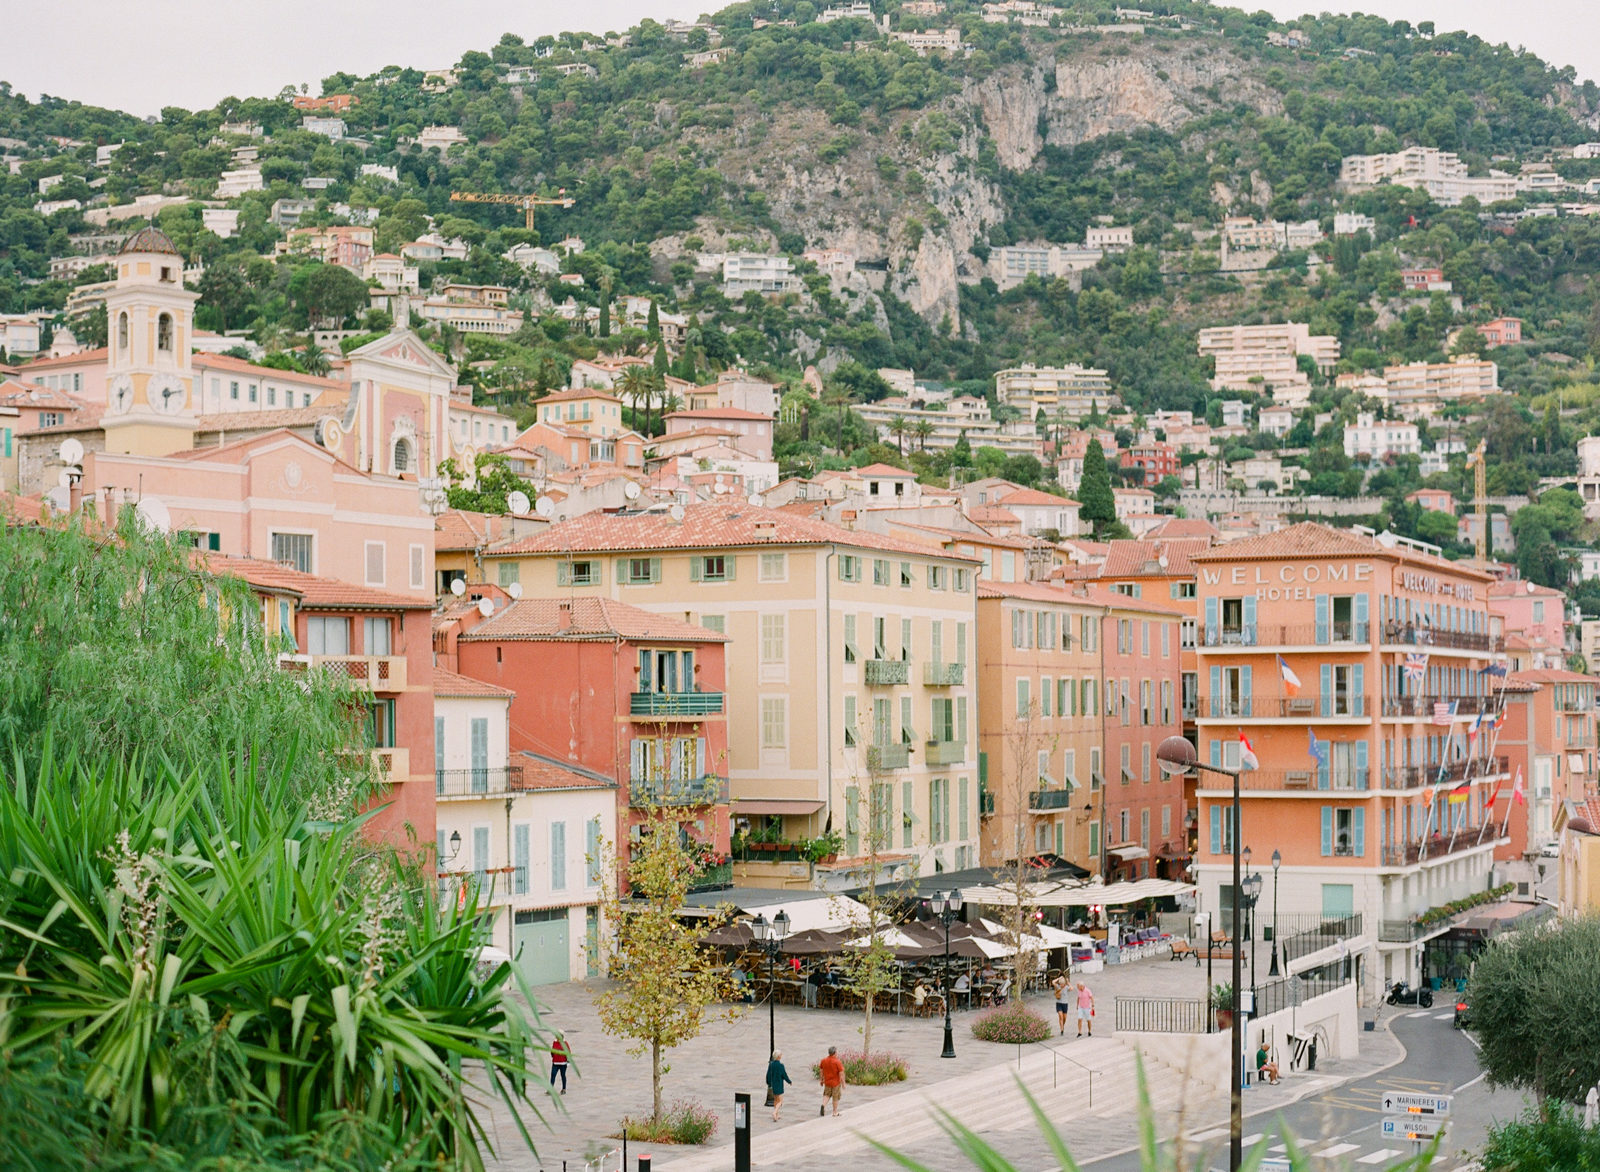 French Riviera Wedding Photographer | Cote d'Azur Travel Guide | Destination Wedding Photographer | Fine Art Film Photographer | Molly Carr Photography | Villefranche-sur-Mer Travel Guide